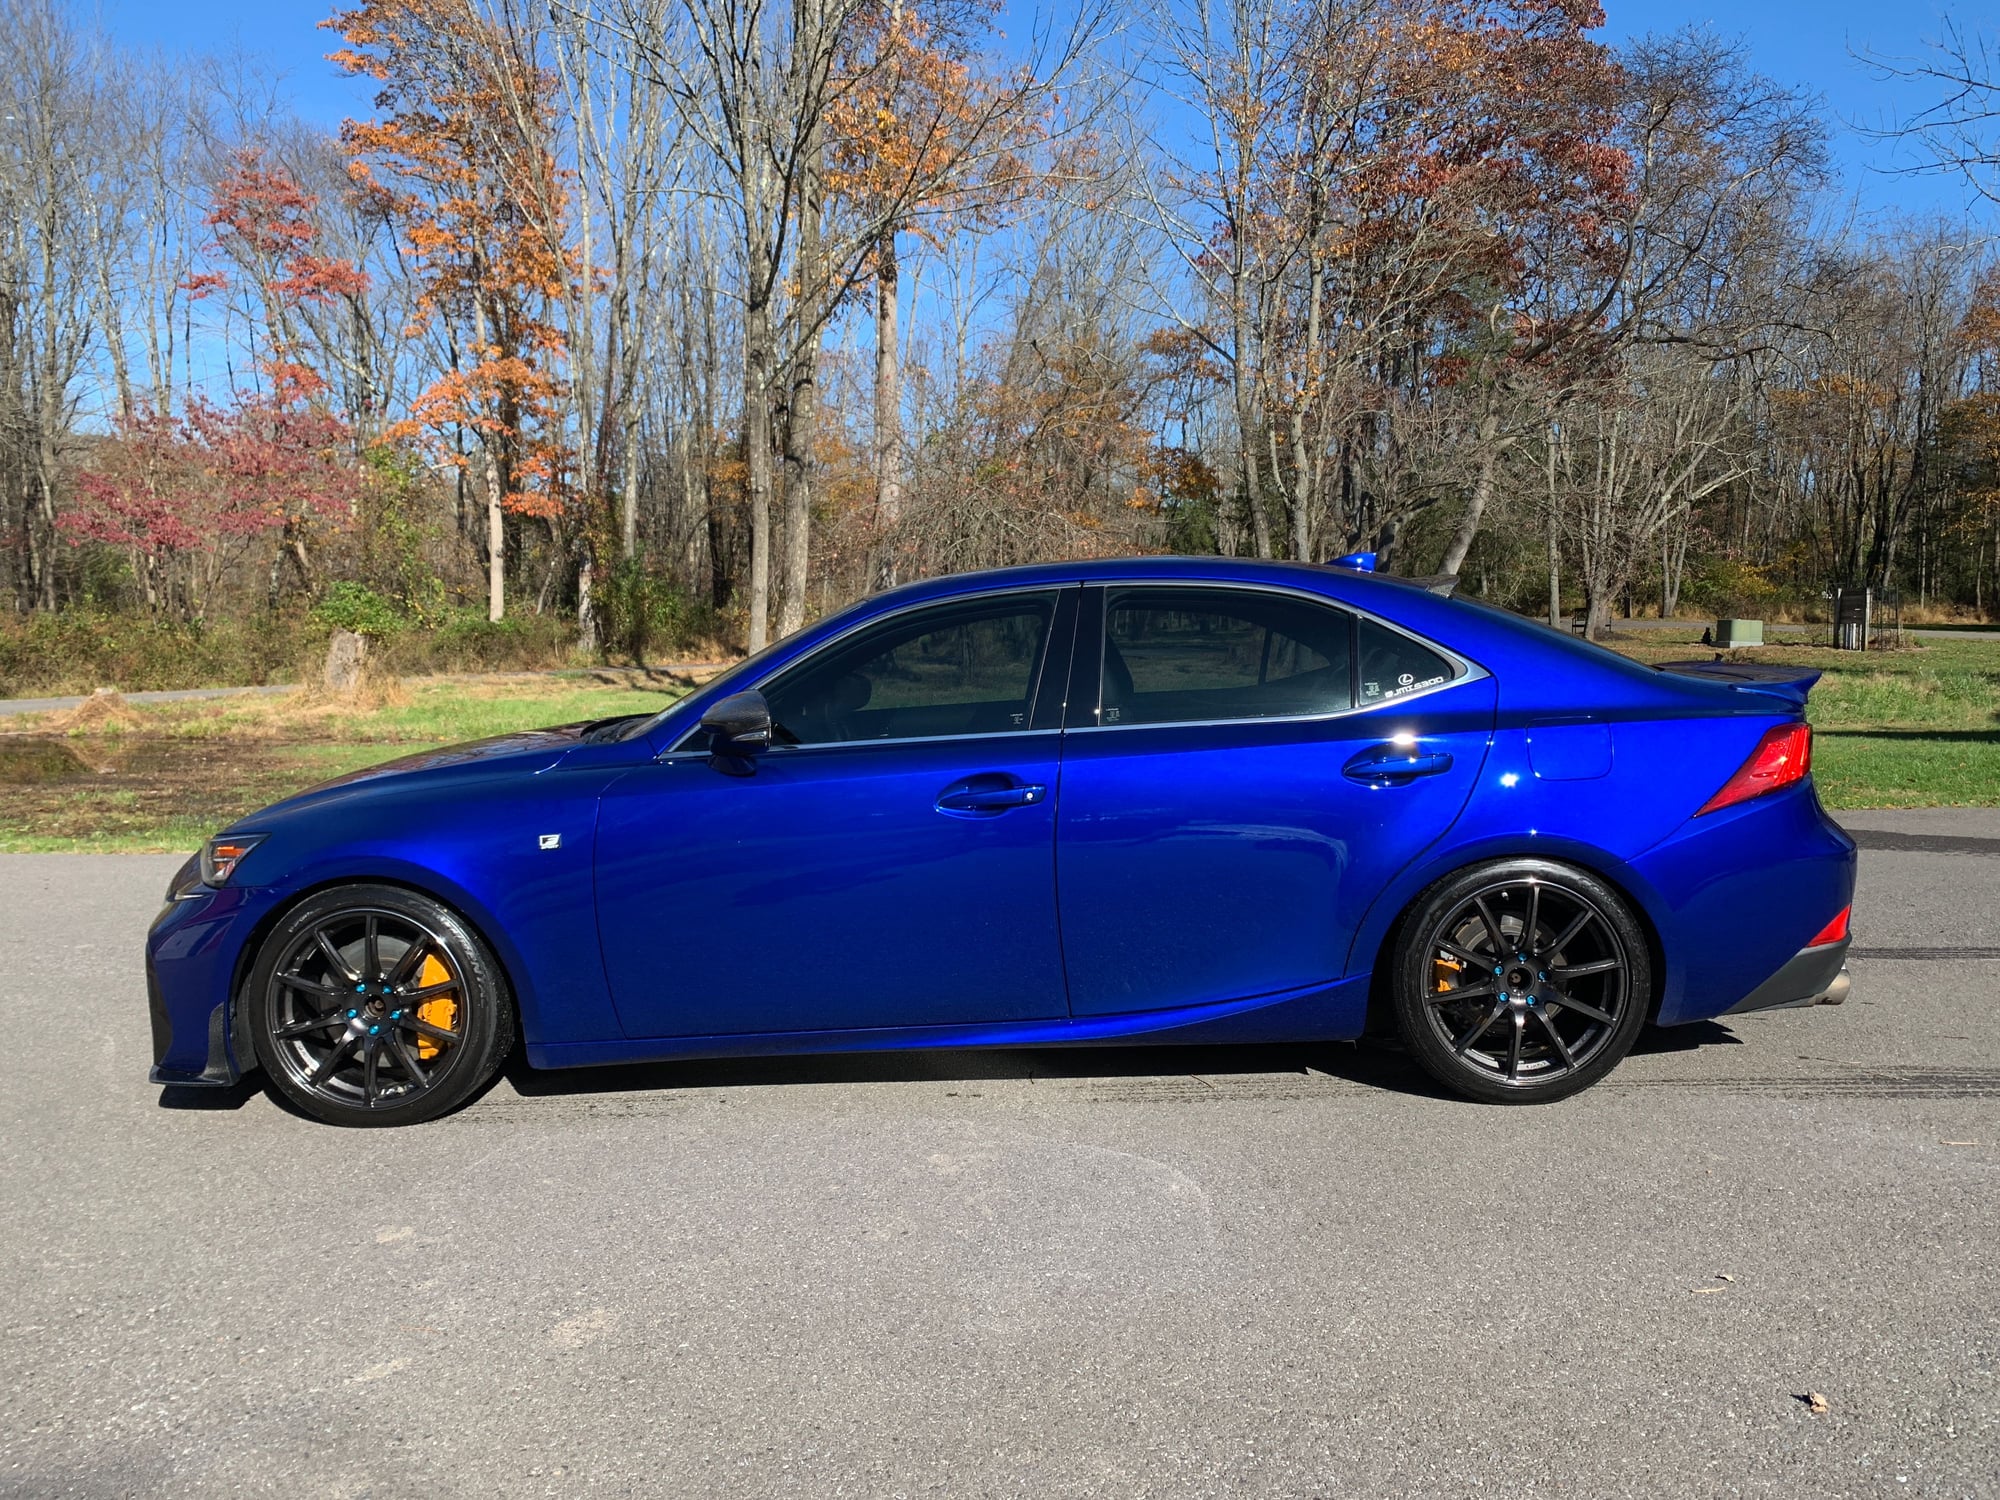 Wheels and Tires/Axles - Rays 57transcend wheels - Used - 2014 to 2019 Lexus IS350 - Clinton, NJ 08809, United States